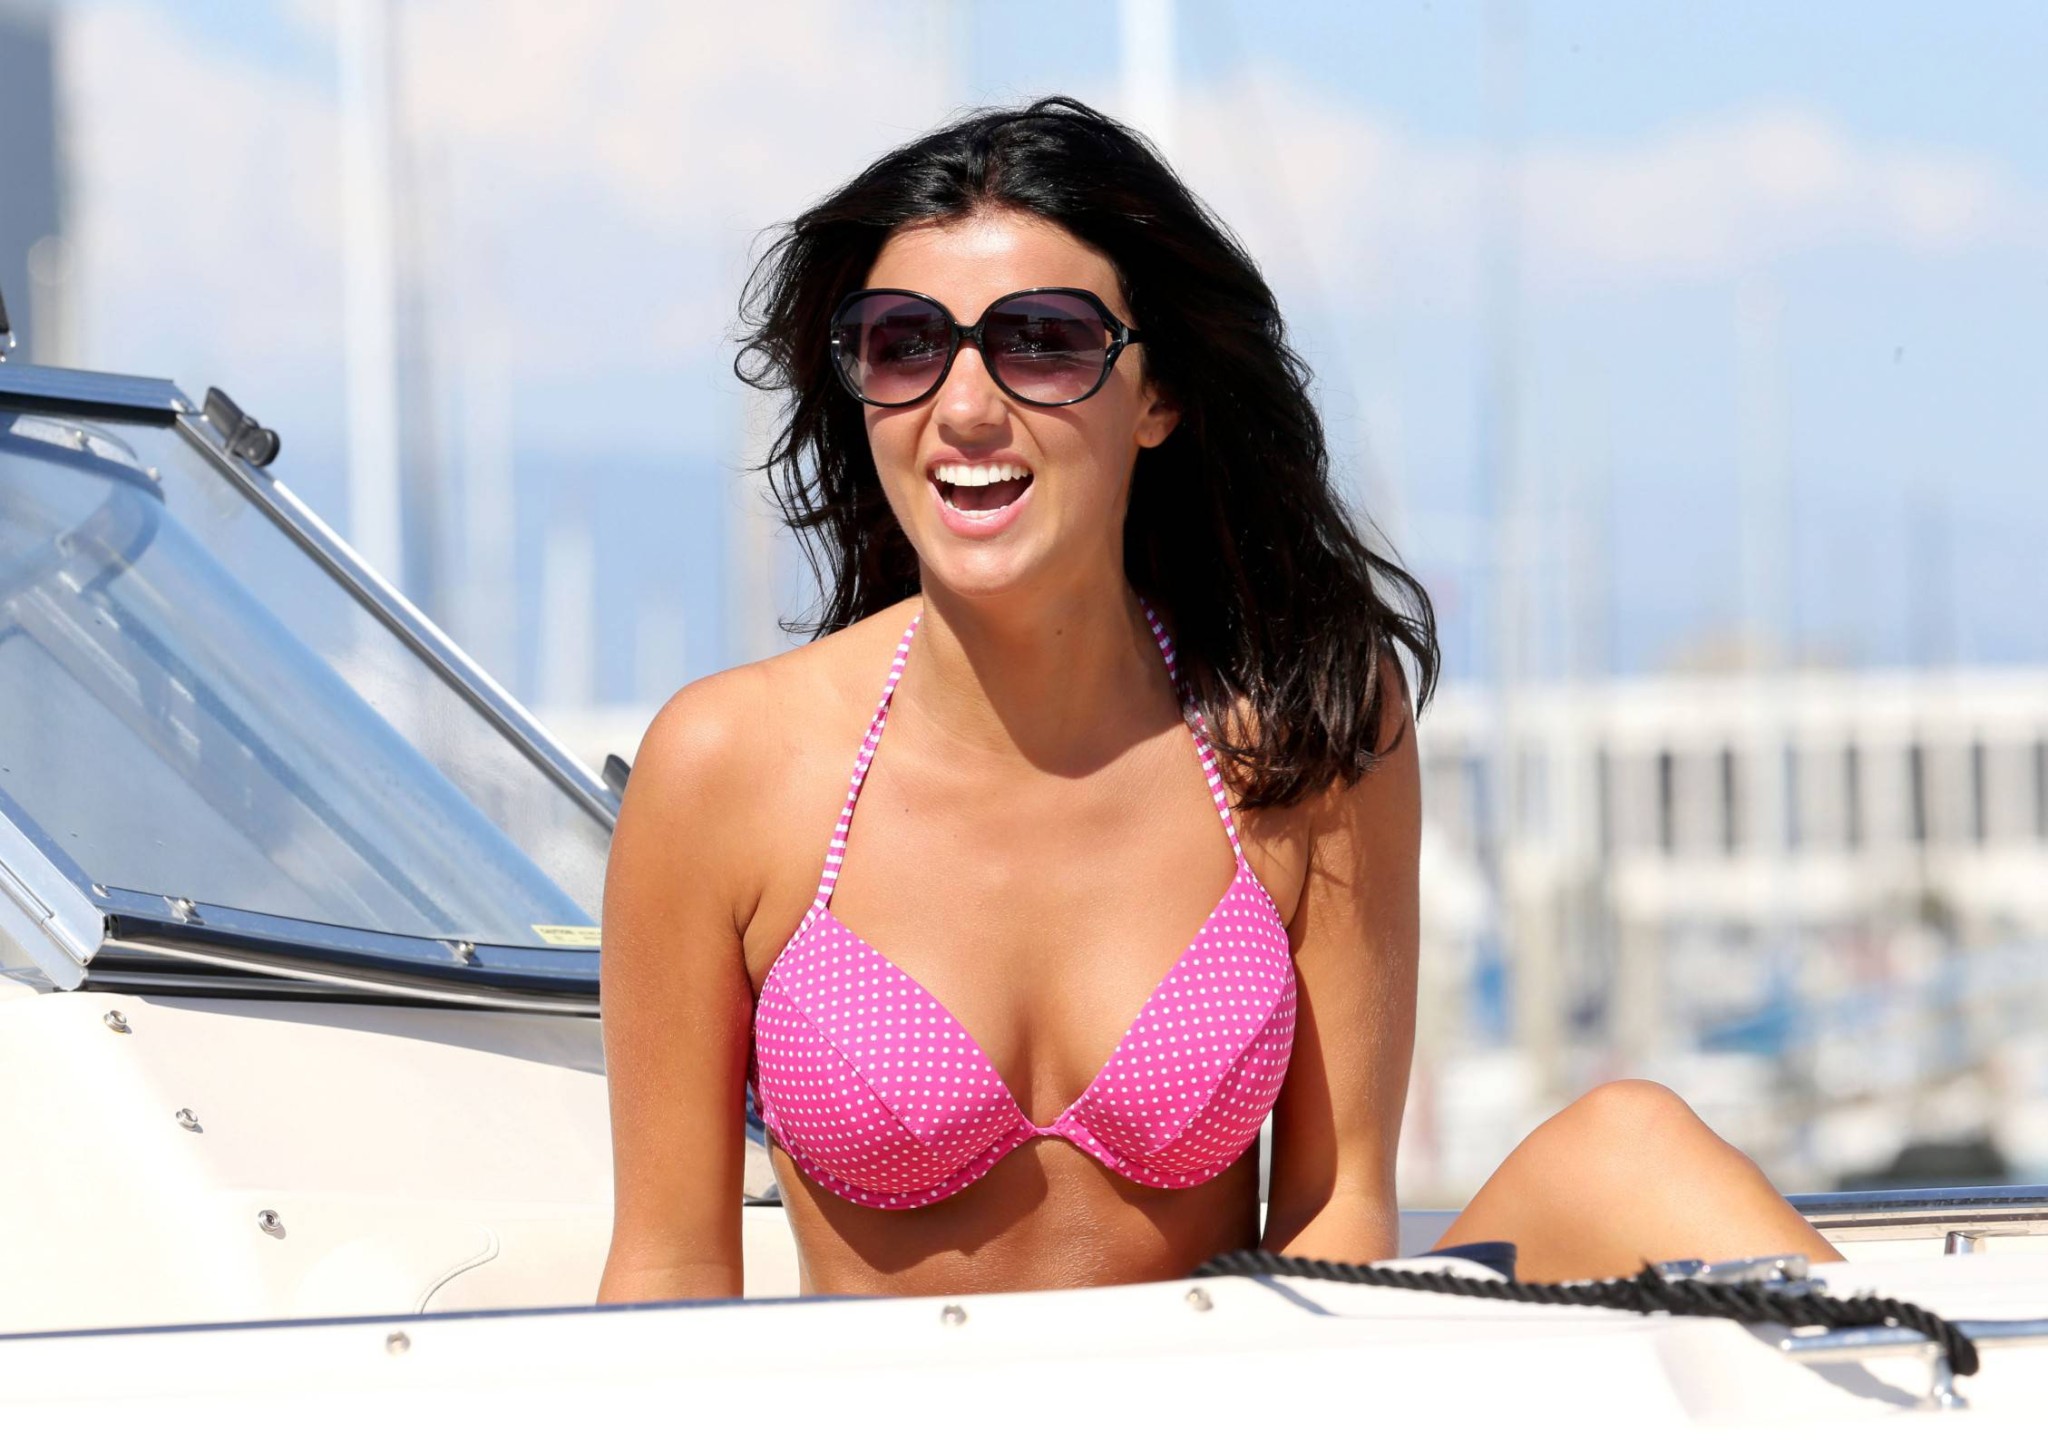 Lucy Mecklenburgh wearing pink polka dot bikini fights with a bottle of Moet at  #75220337